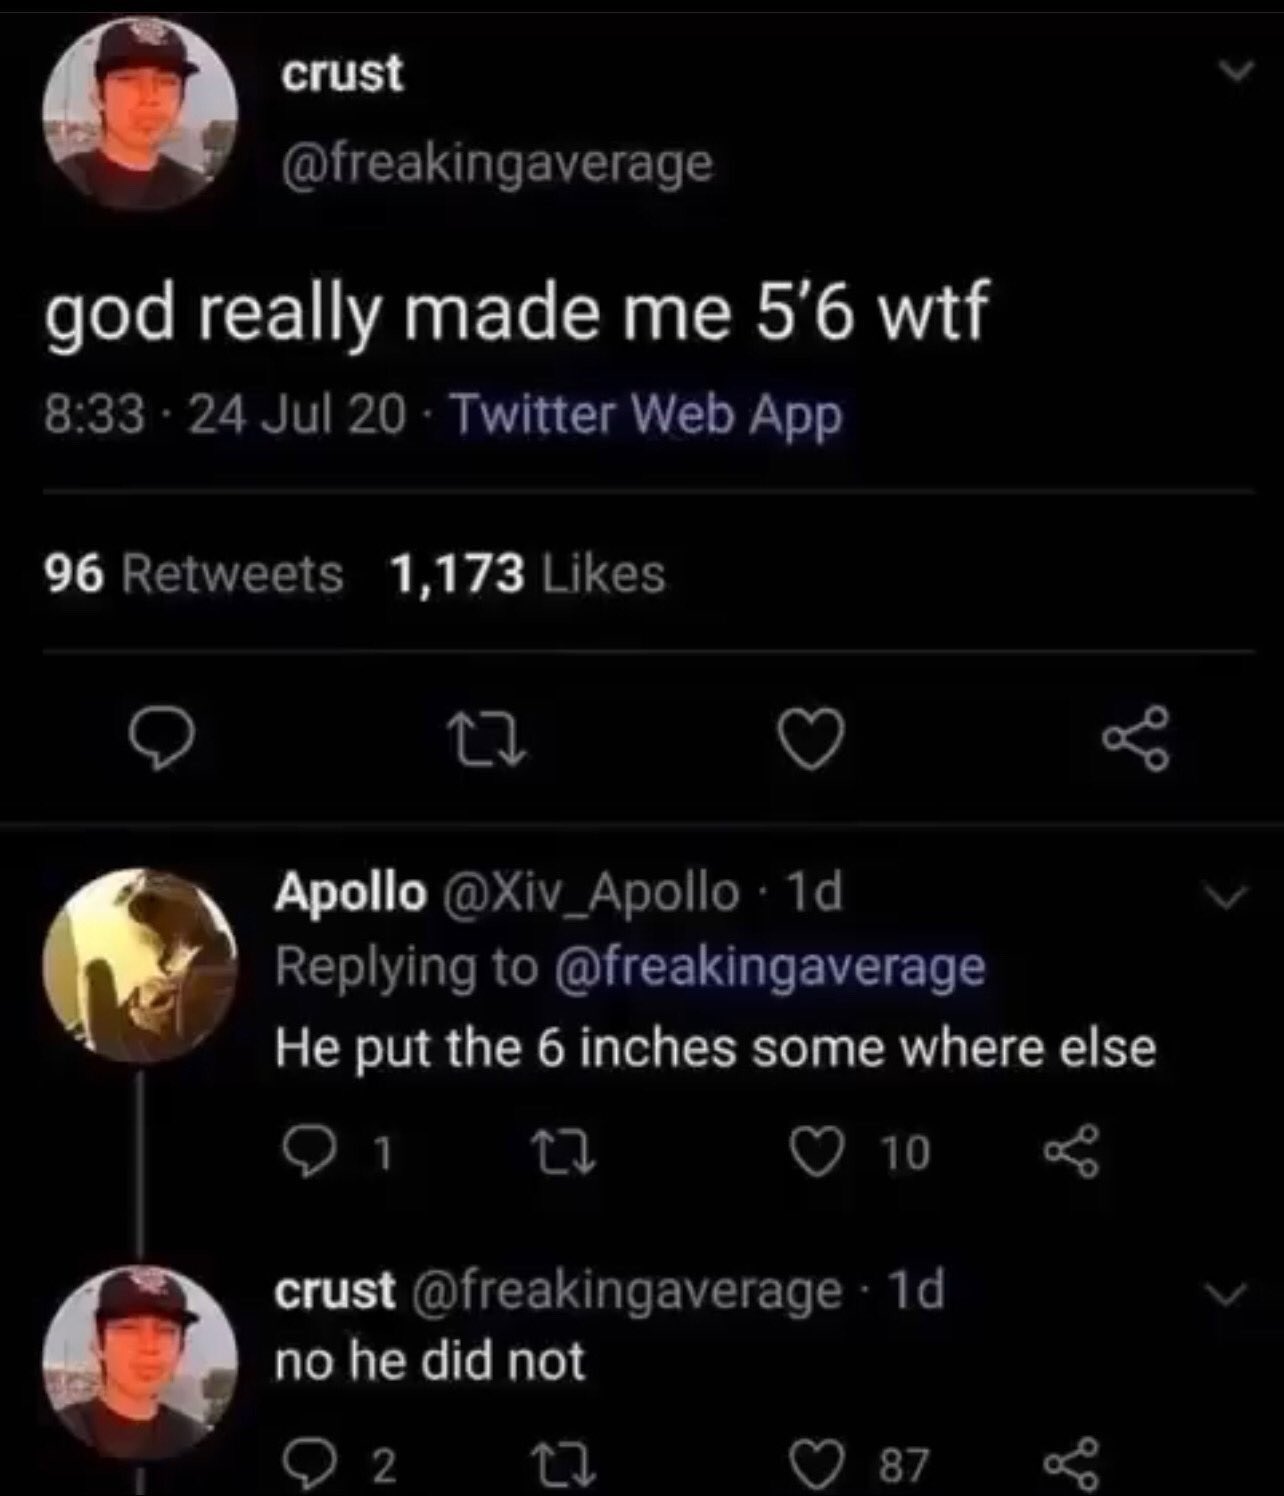 world class insults - god really made me 5 6 wtf twitter - crust god really made me 5'6 wtf 24 Jul 20 Twitter Web App 96 1,173 27 Apollo 1d He put the 6 inches some where else 1 10 crust 1d no he did not 2 22 go 87